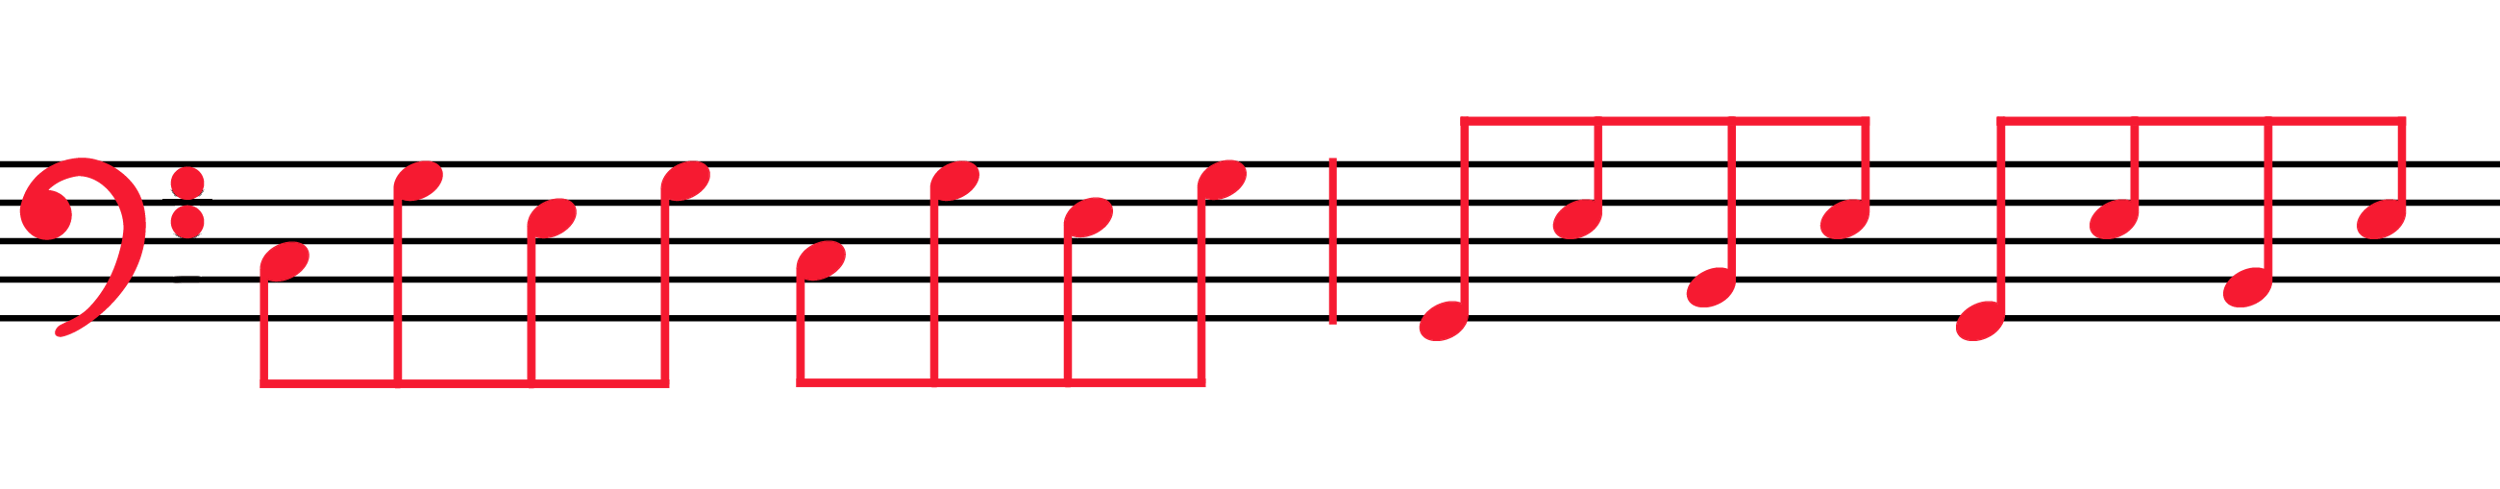 Alberti bass pattern on bass clef: red eighth notes going C-G-E-G C-G-E-G then G-E-B-E G-E-B-E.